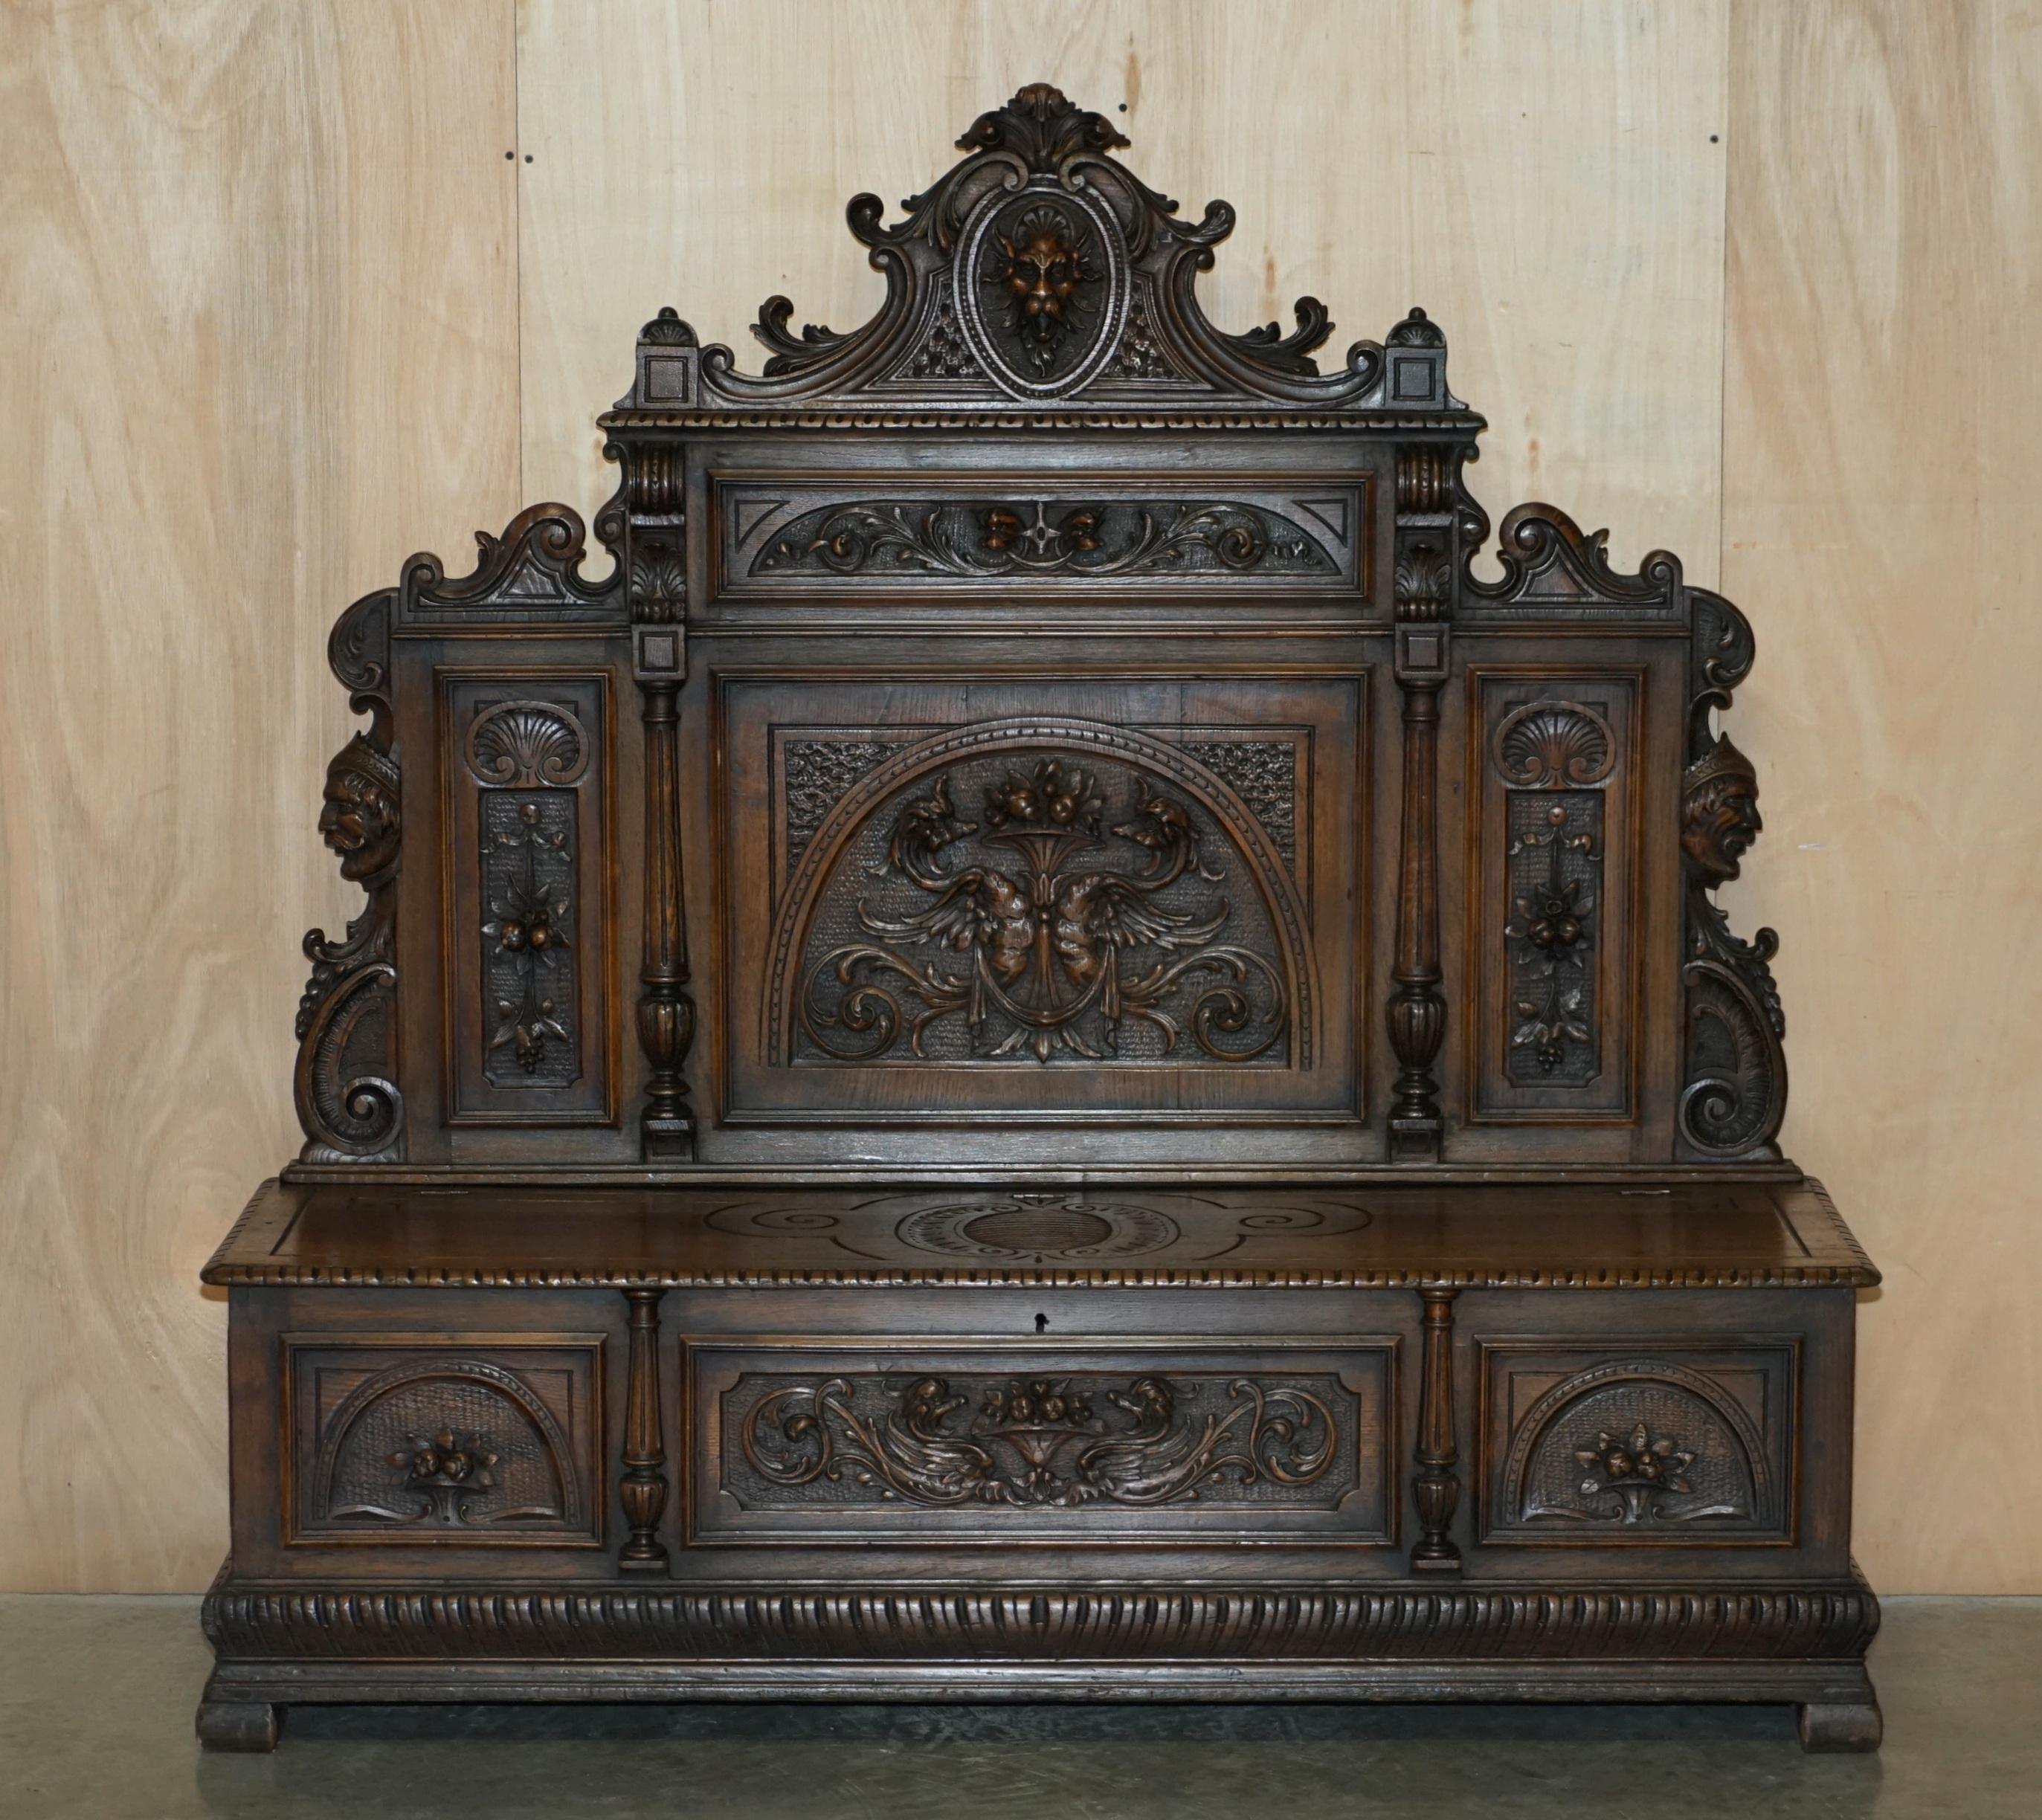 We are delighted to offer for sale this stunning hand carved circa 1860 Monks oak settle bench with internal storage.

A very good looking and well made hall bench, its a Monk Settle which is very popular and collectable, you often see them in